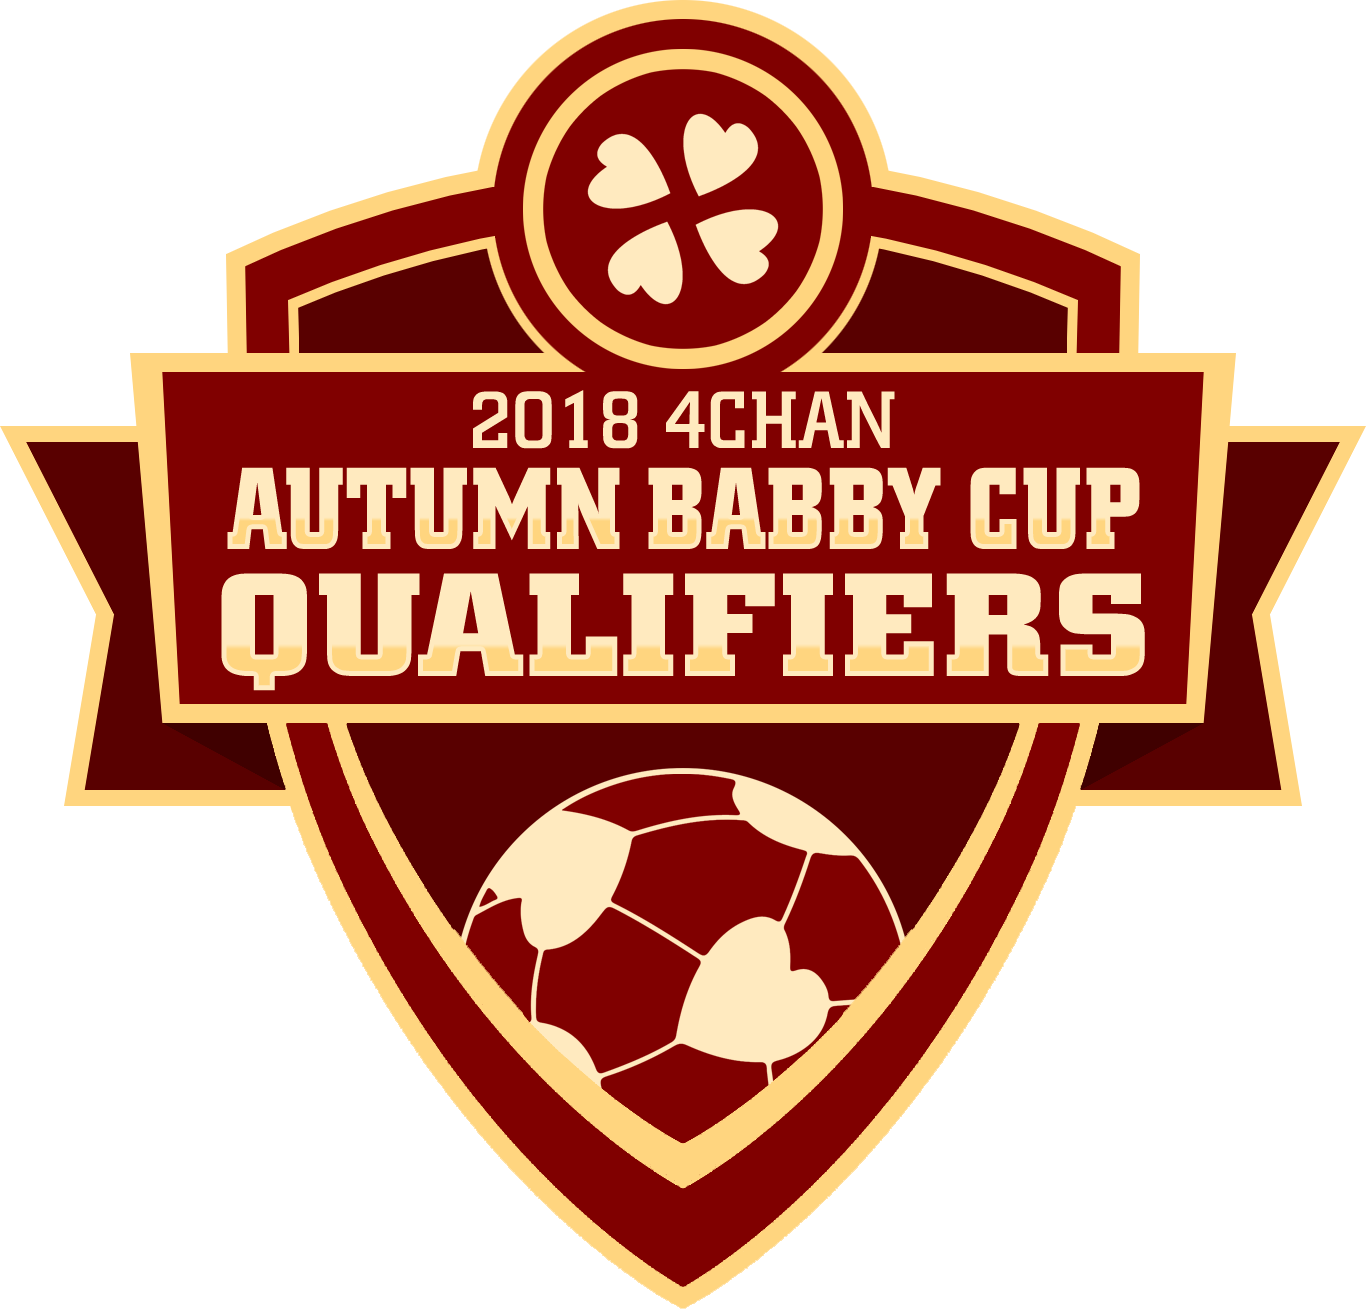 2018 4chan Autumn Babby Cup Qualifiers